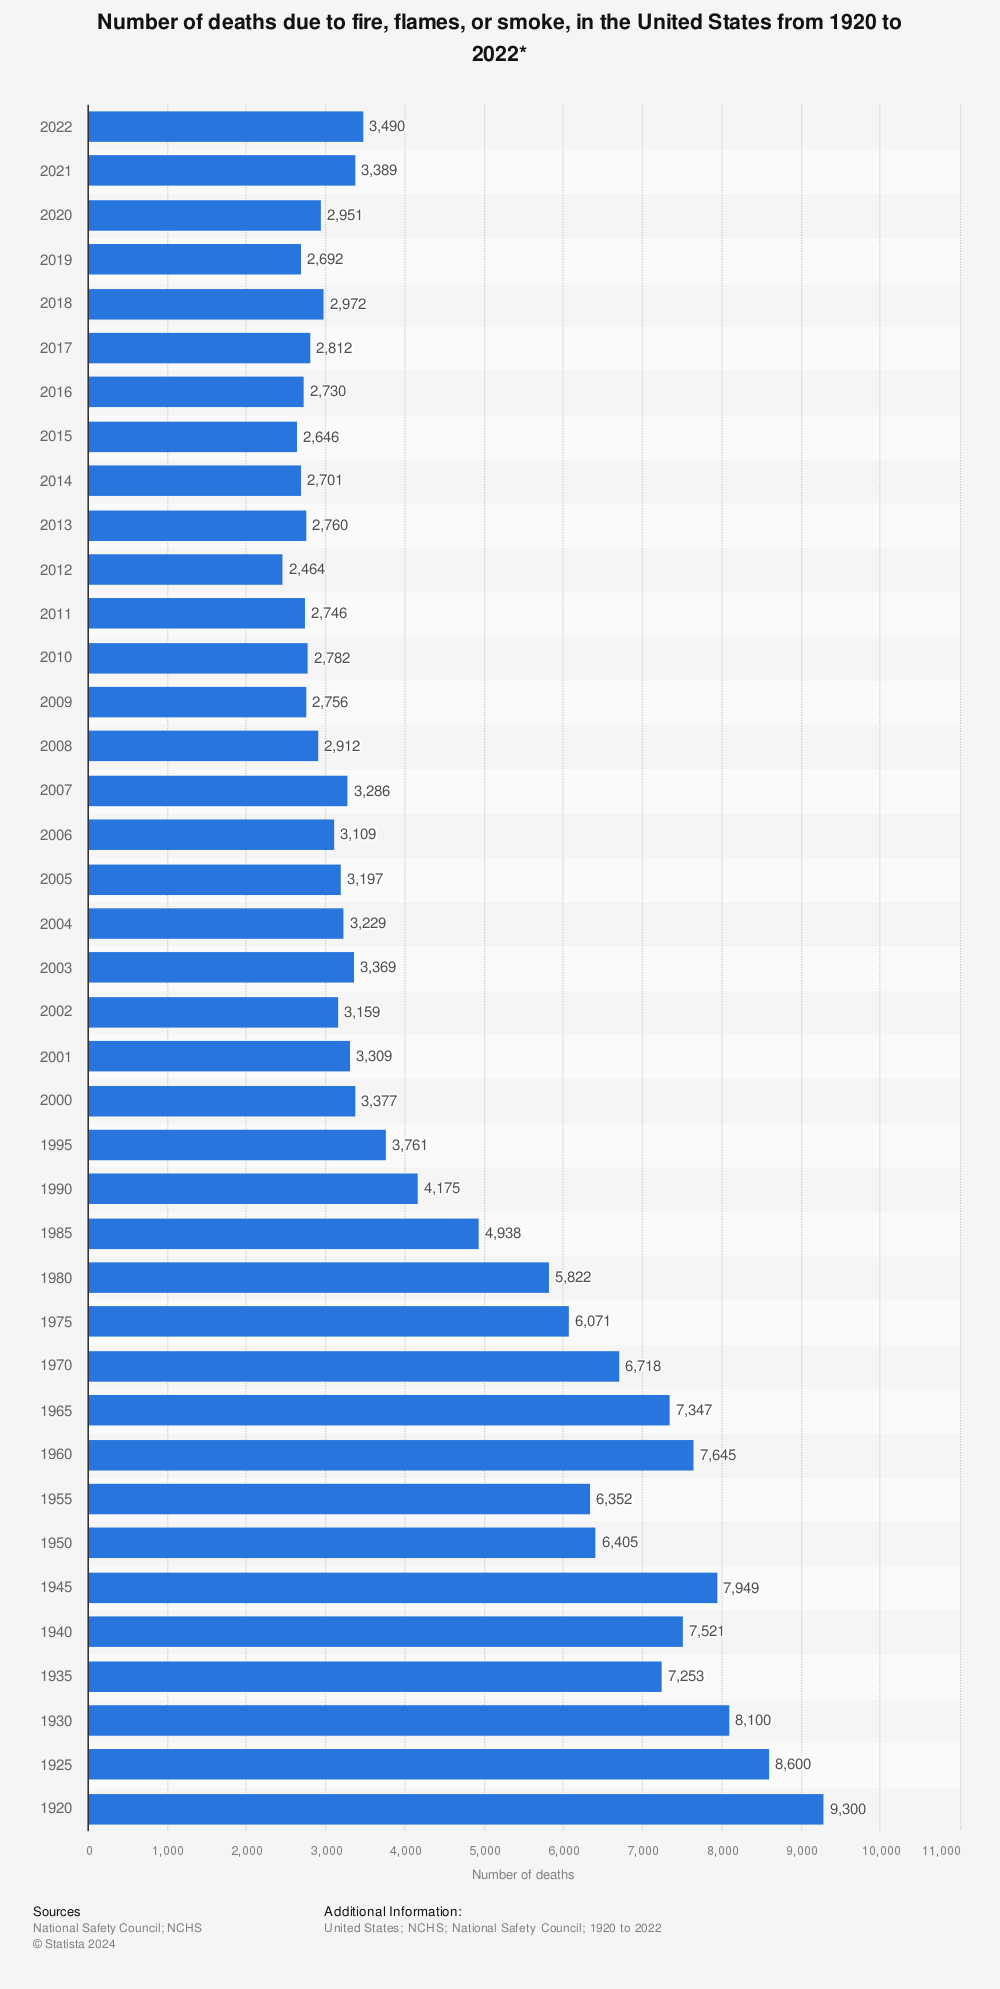 Statistic: Number of deaths due to fire, flames, or smoke, in the United States from 1920 to 2020 | Statista